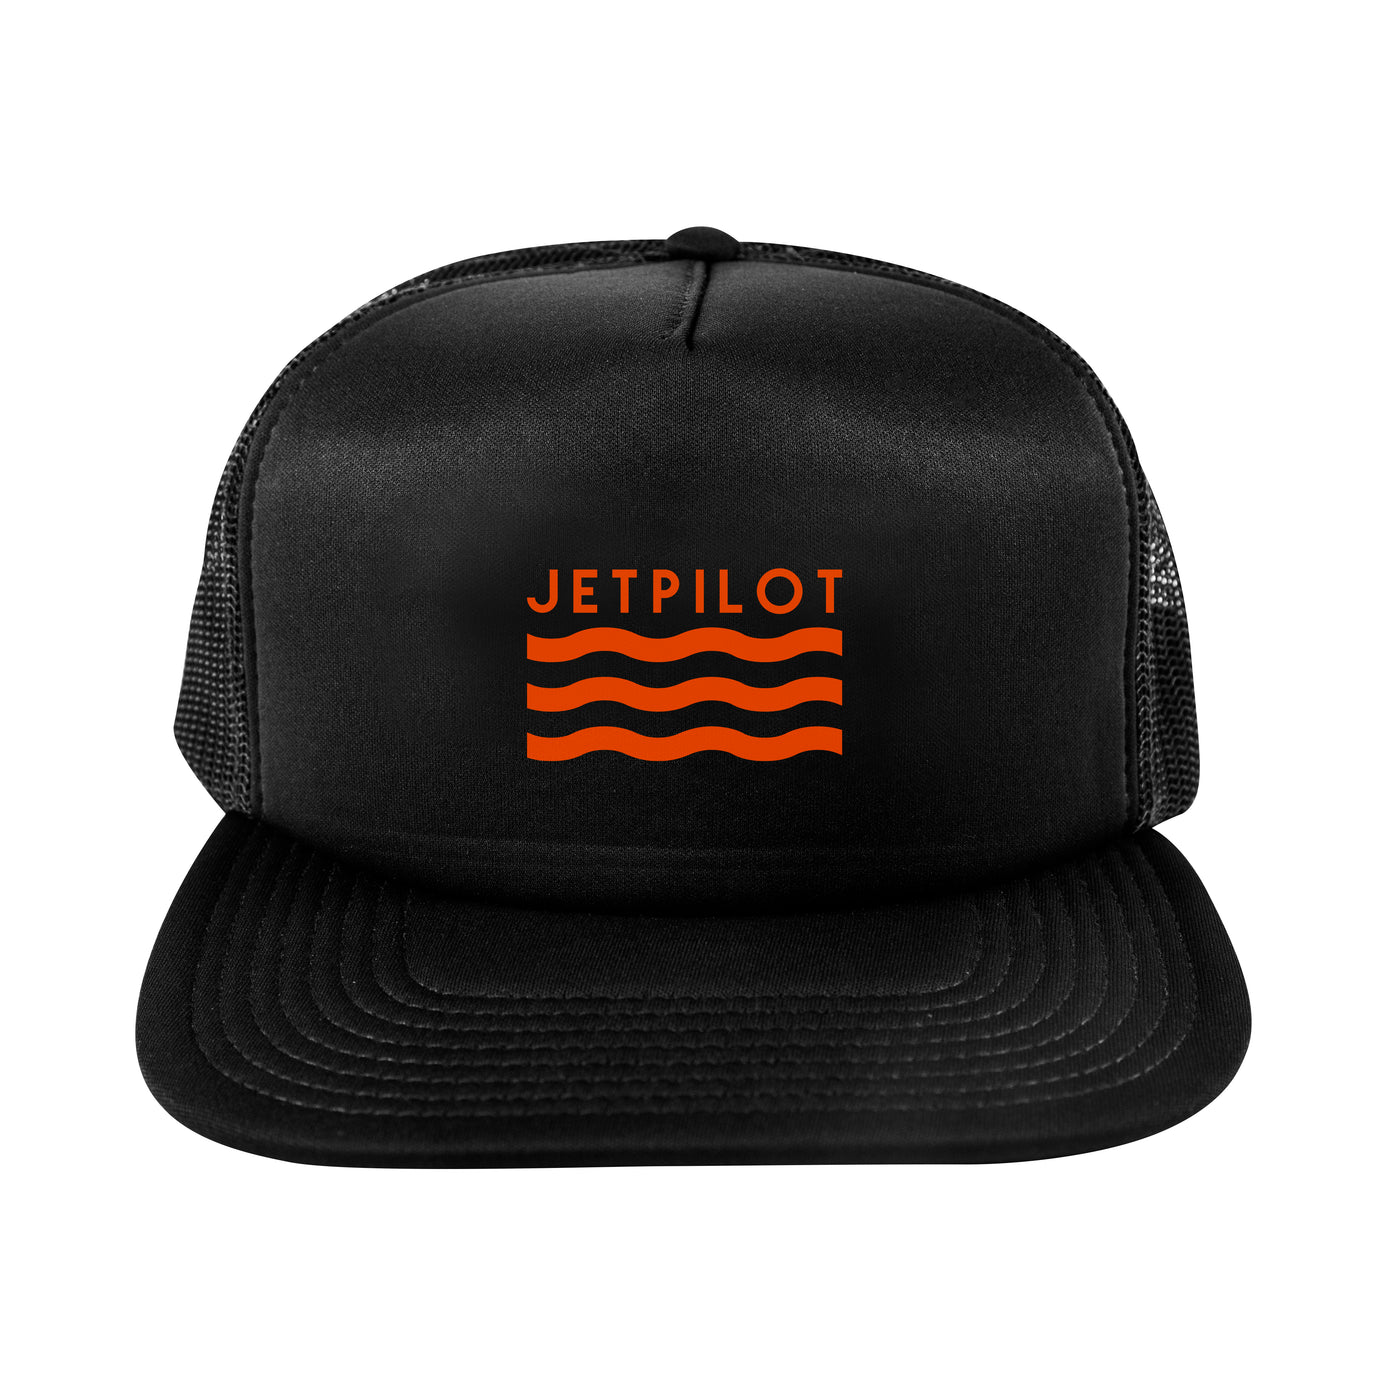 Front view of the black LRE hat